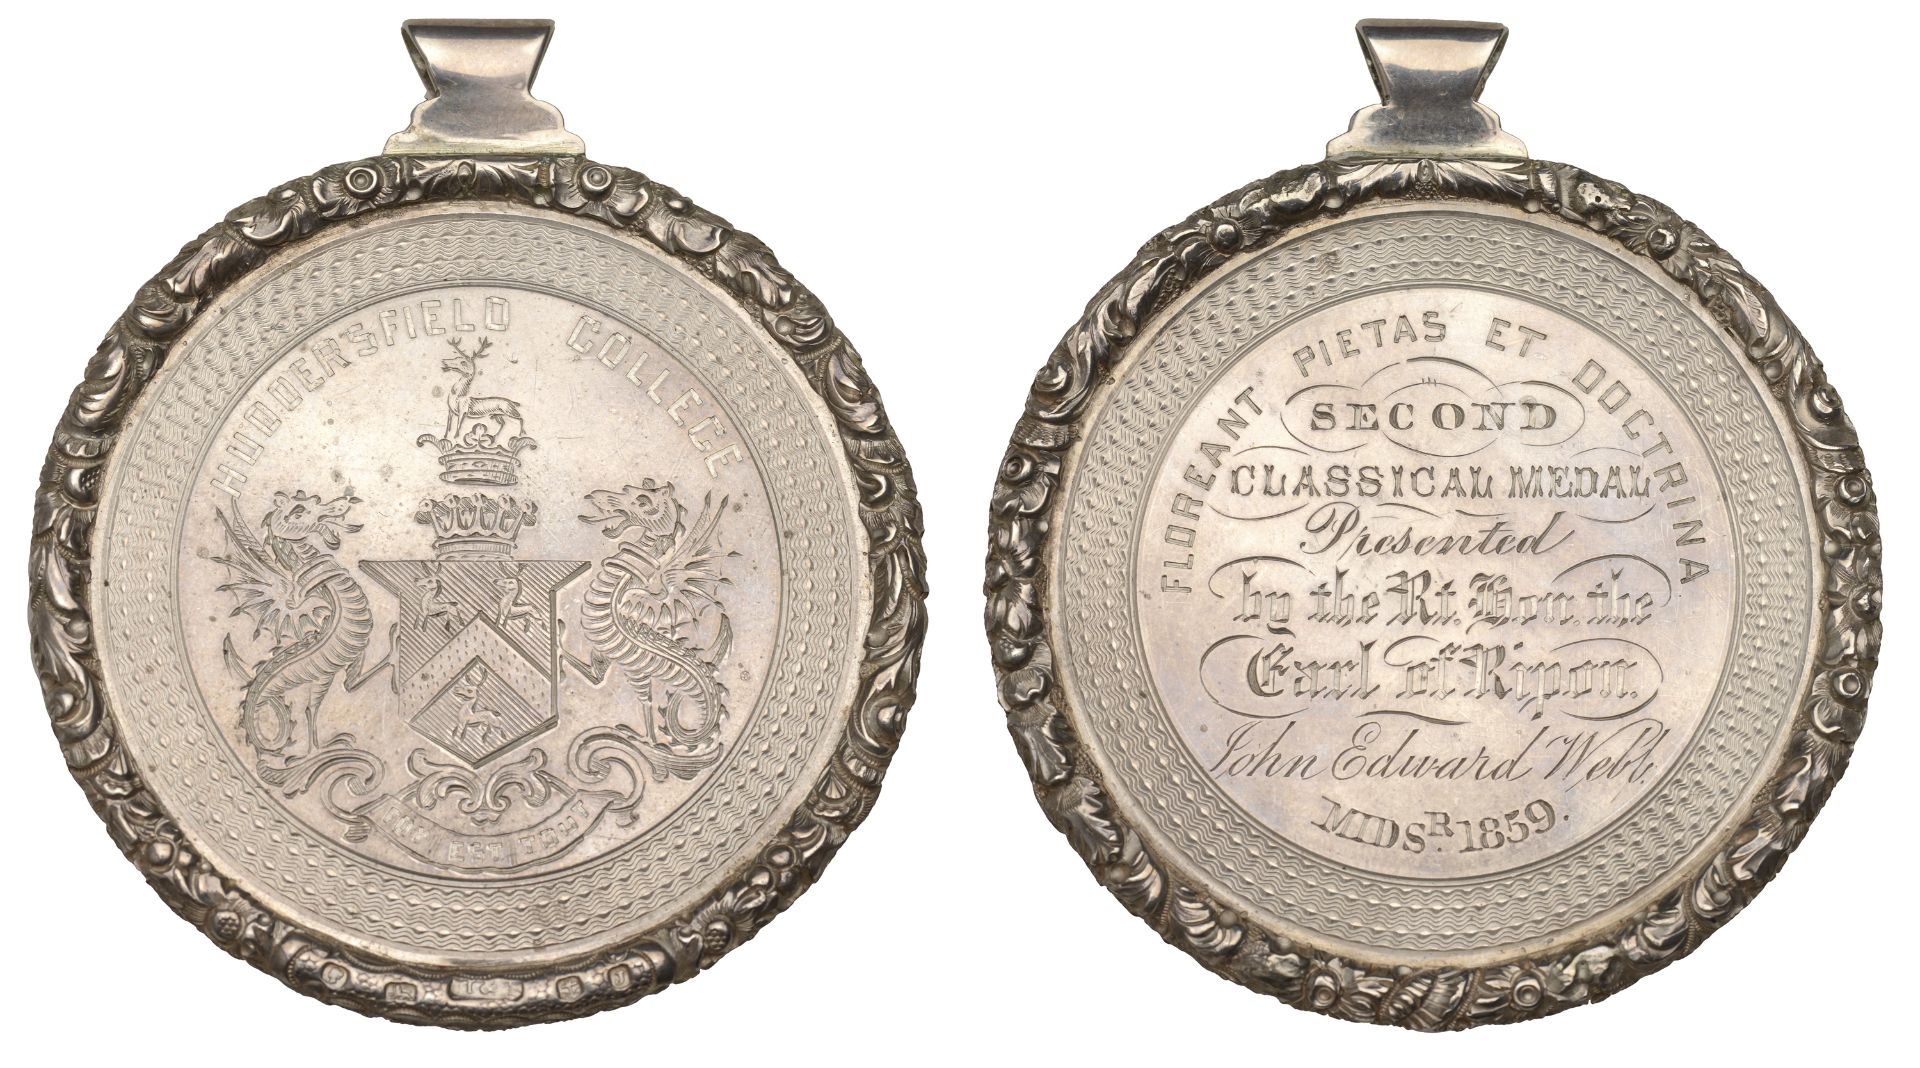 Huddersfield College, a silver award medal, engraved arms with supporters, rev. named (Secon...